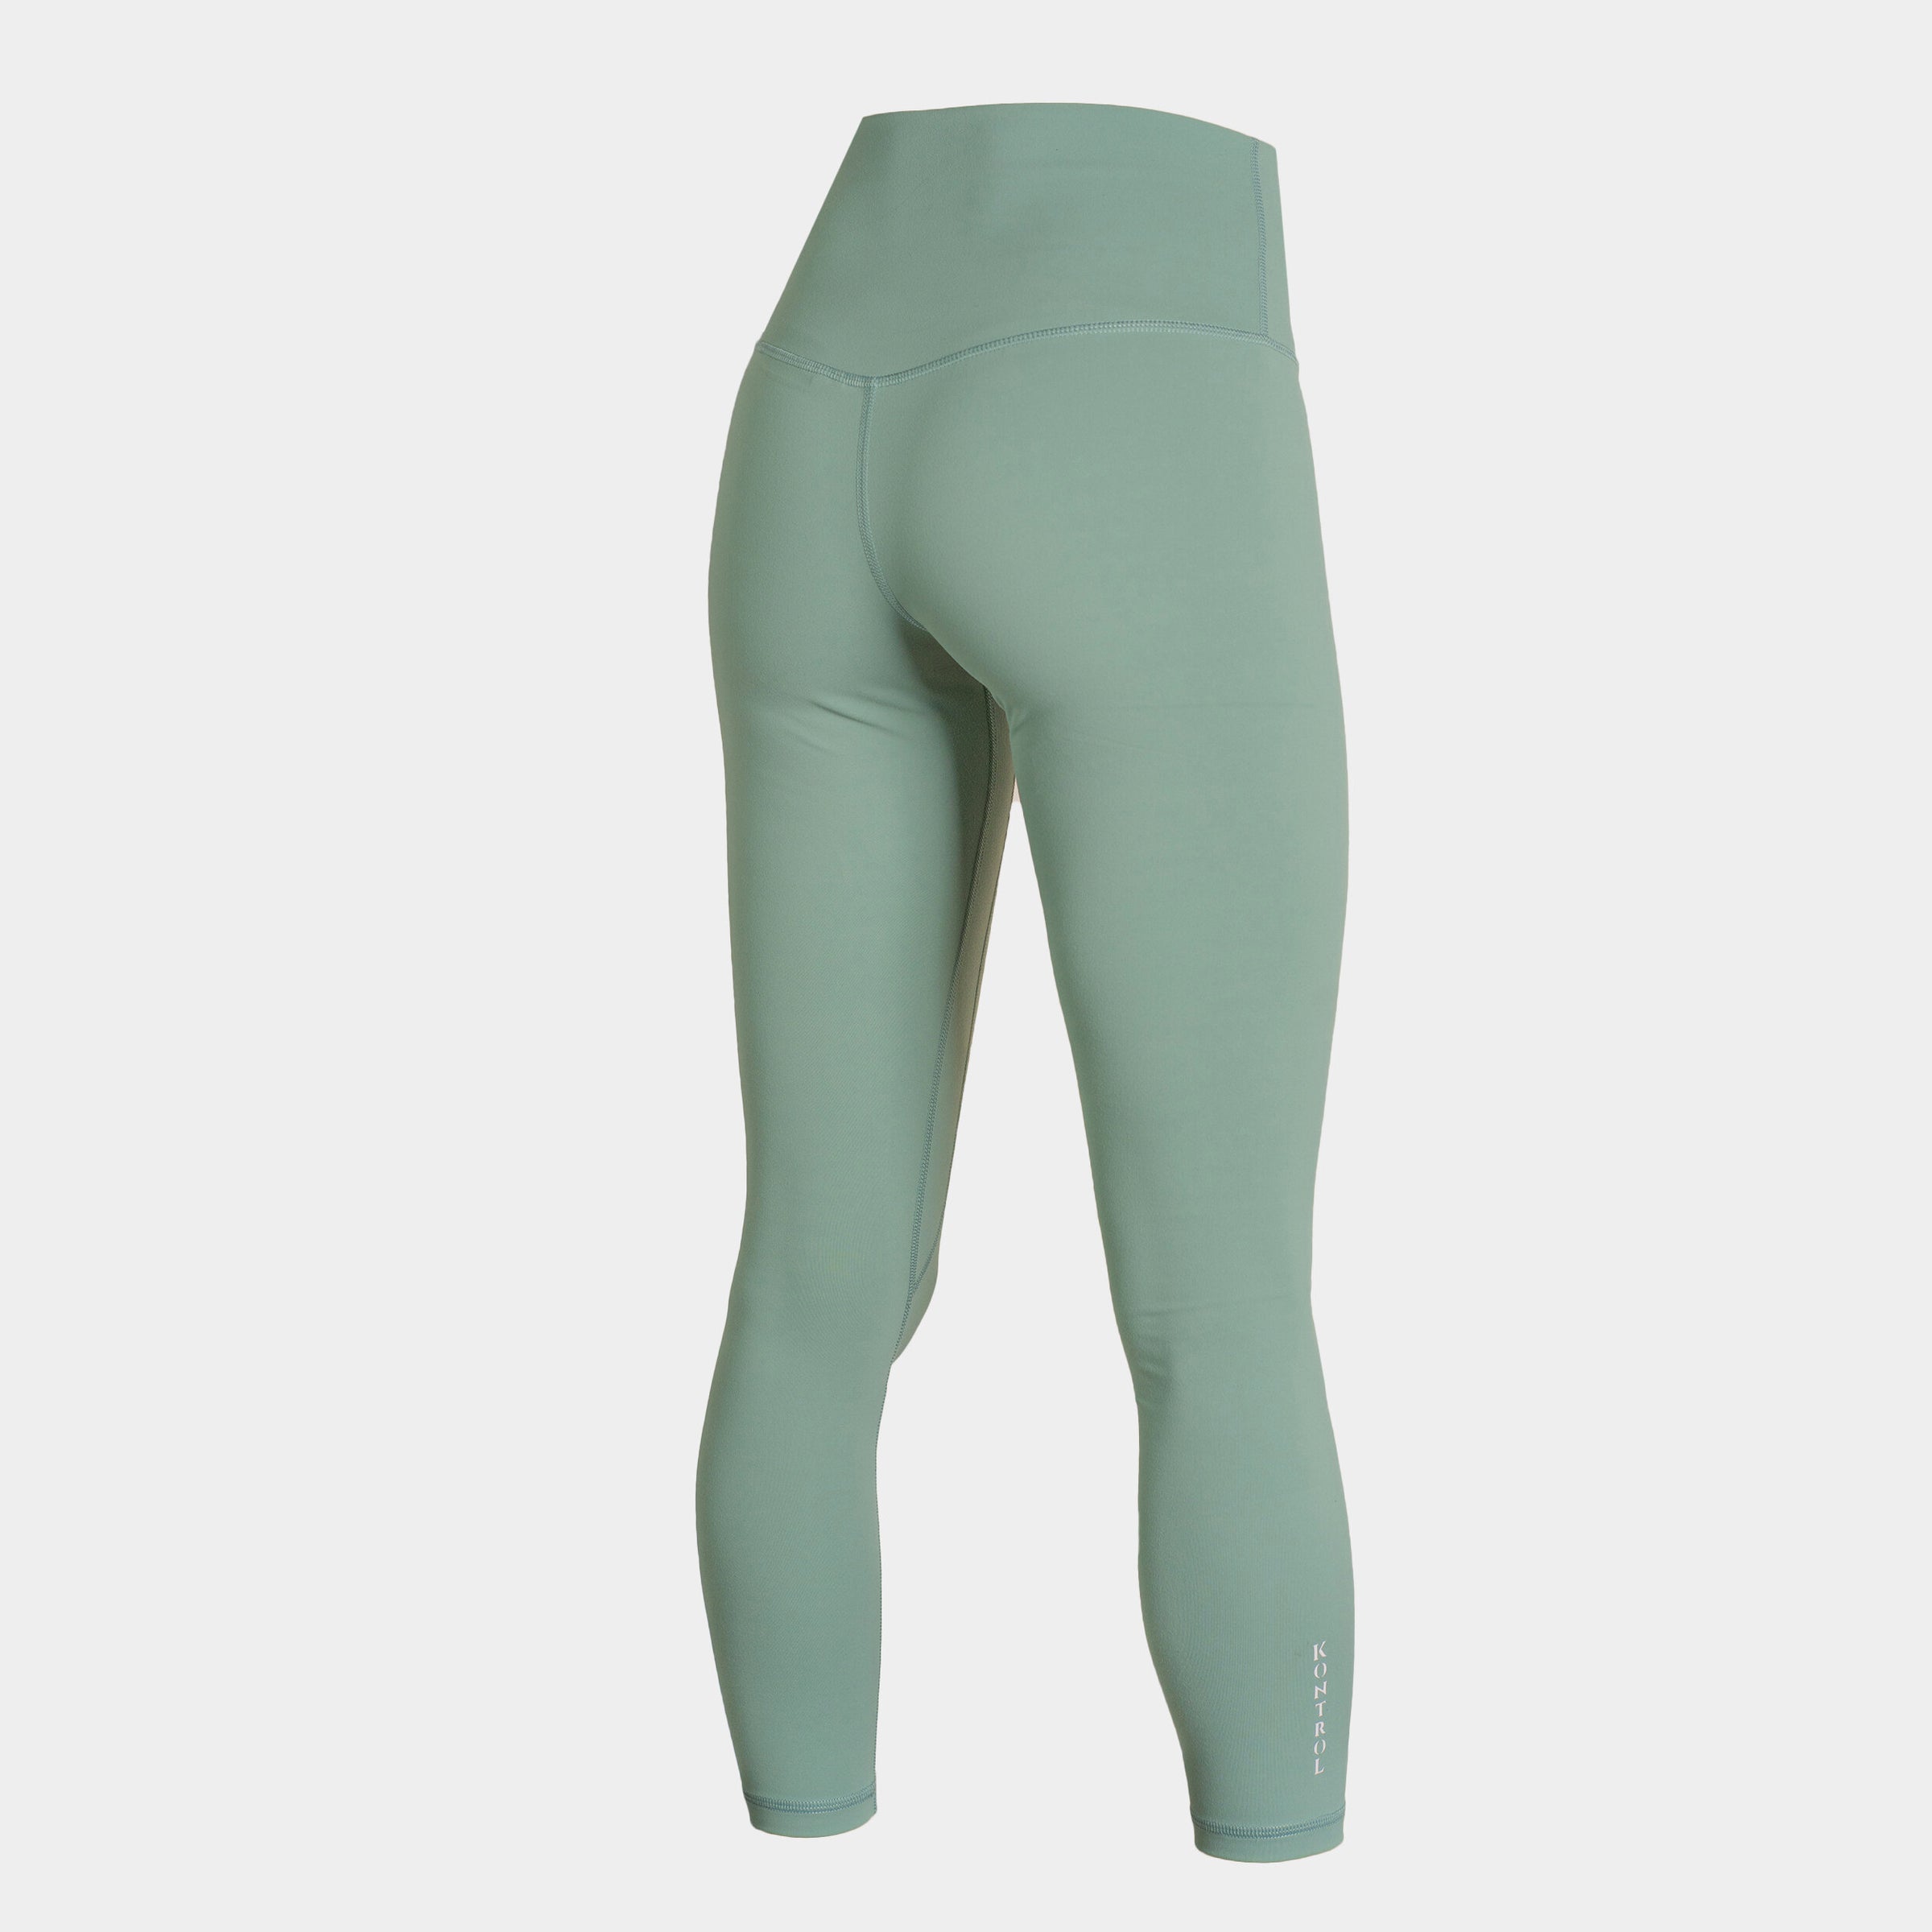 Coral Buttersoft Moto Leggings  Mindy's Boutique - Join Our Live Sale